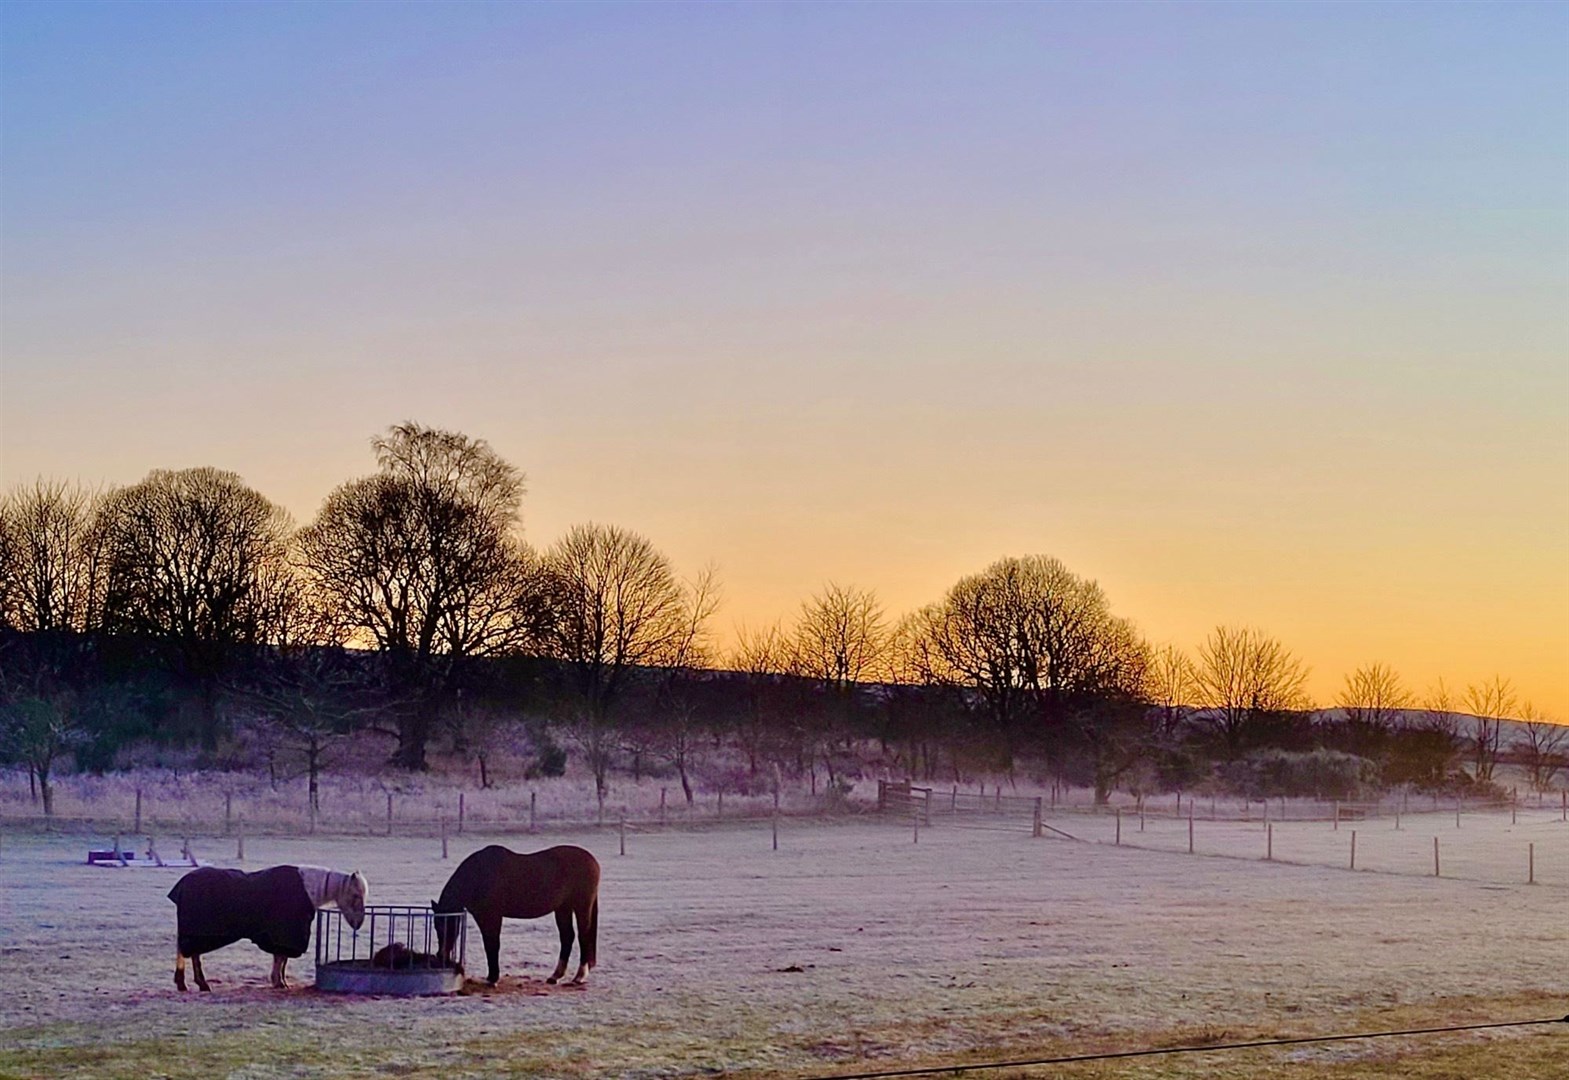 A Moray sunset over these horses in a field snapped by Hazel Thomson.